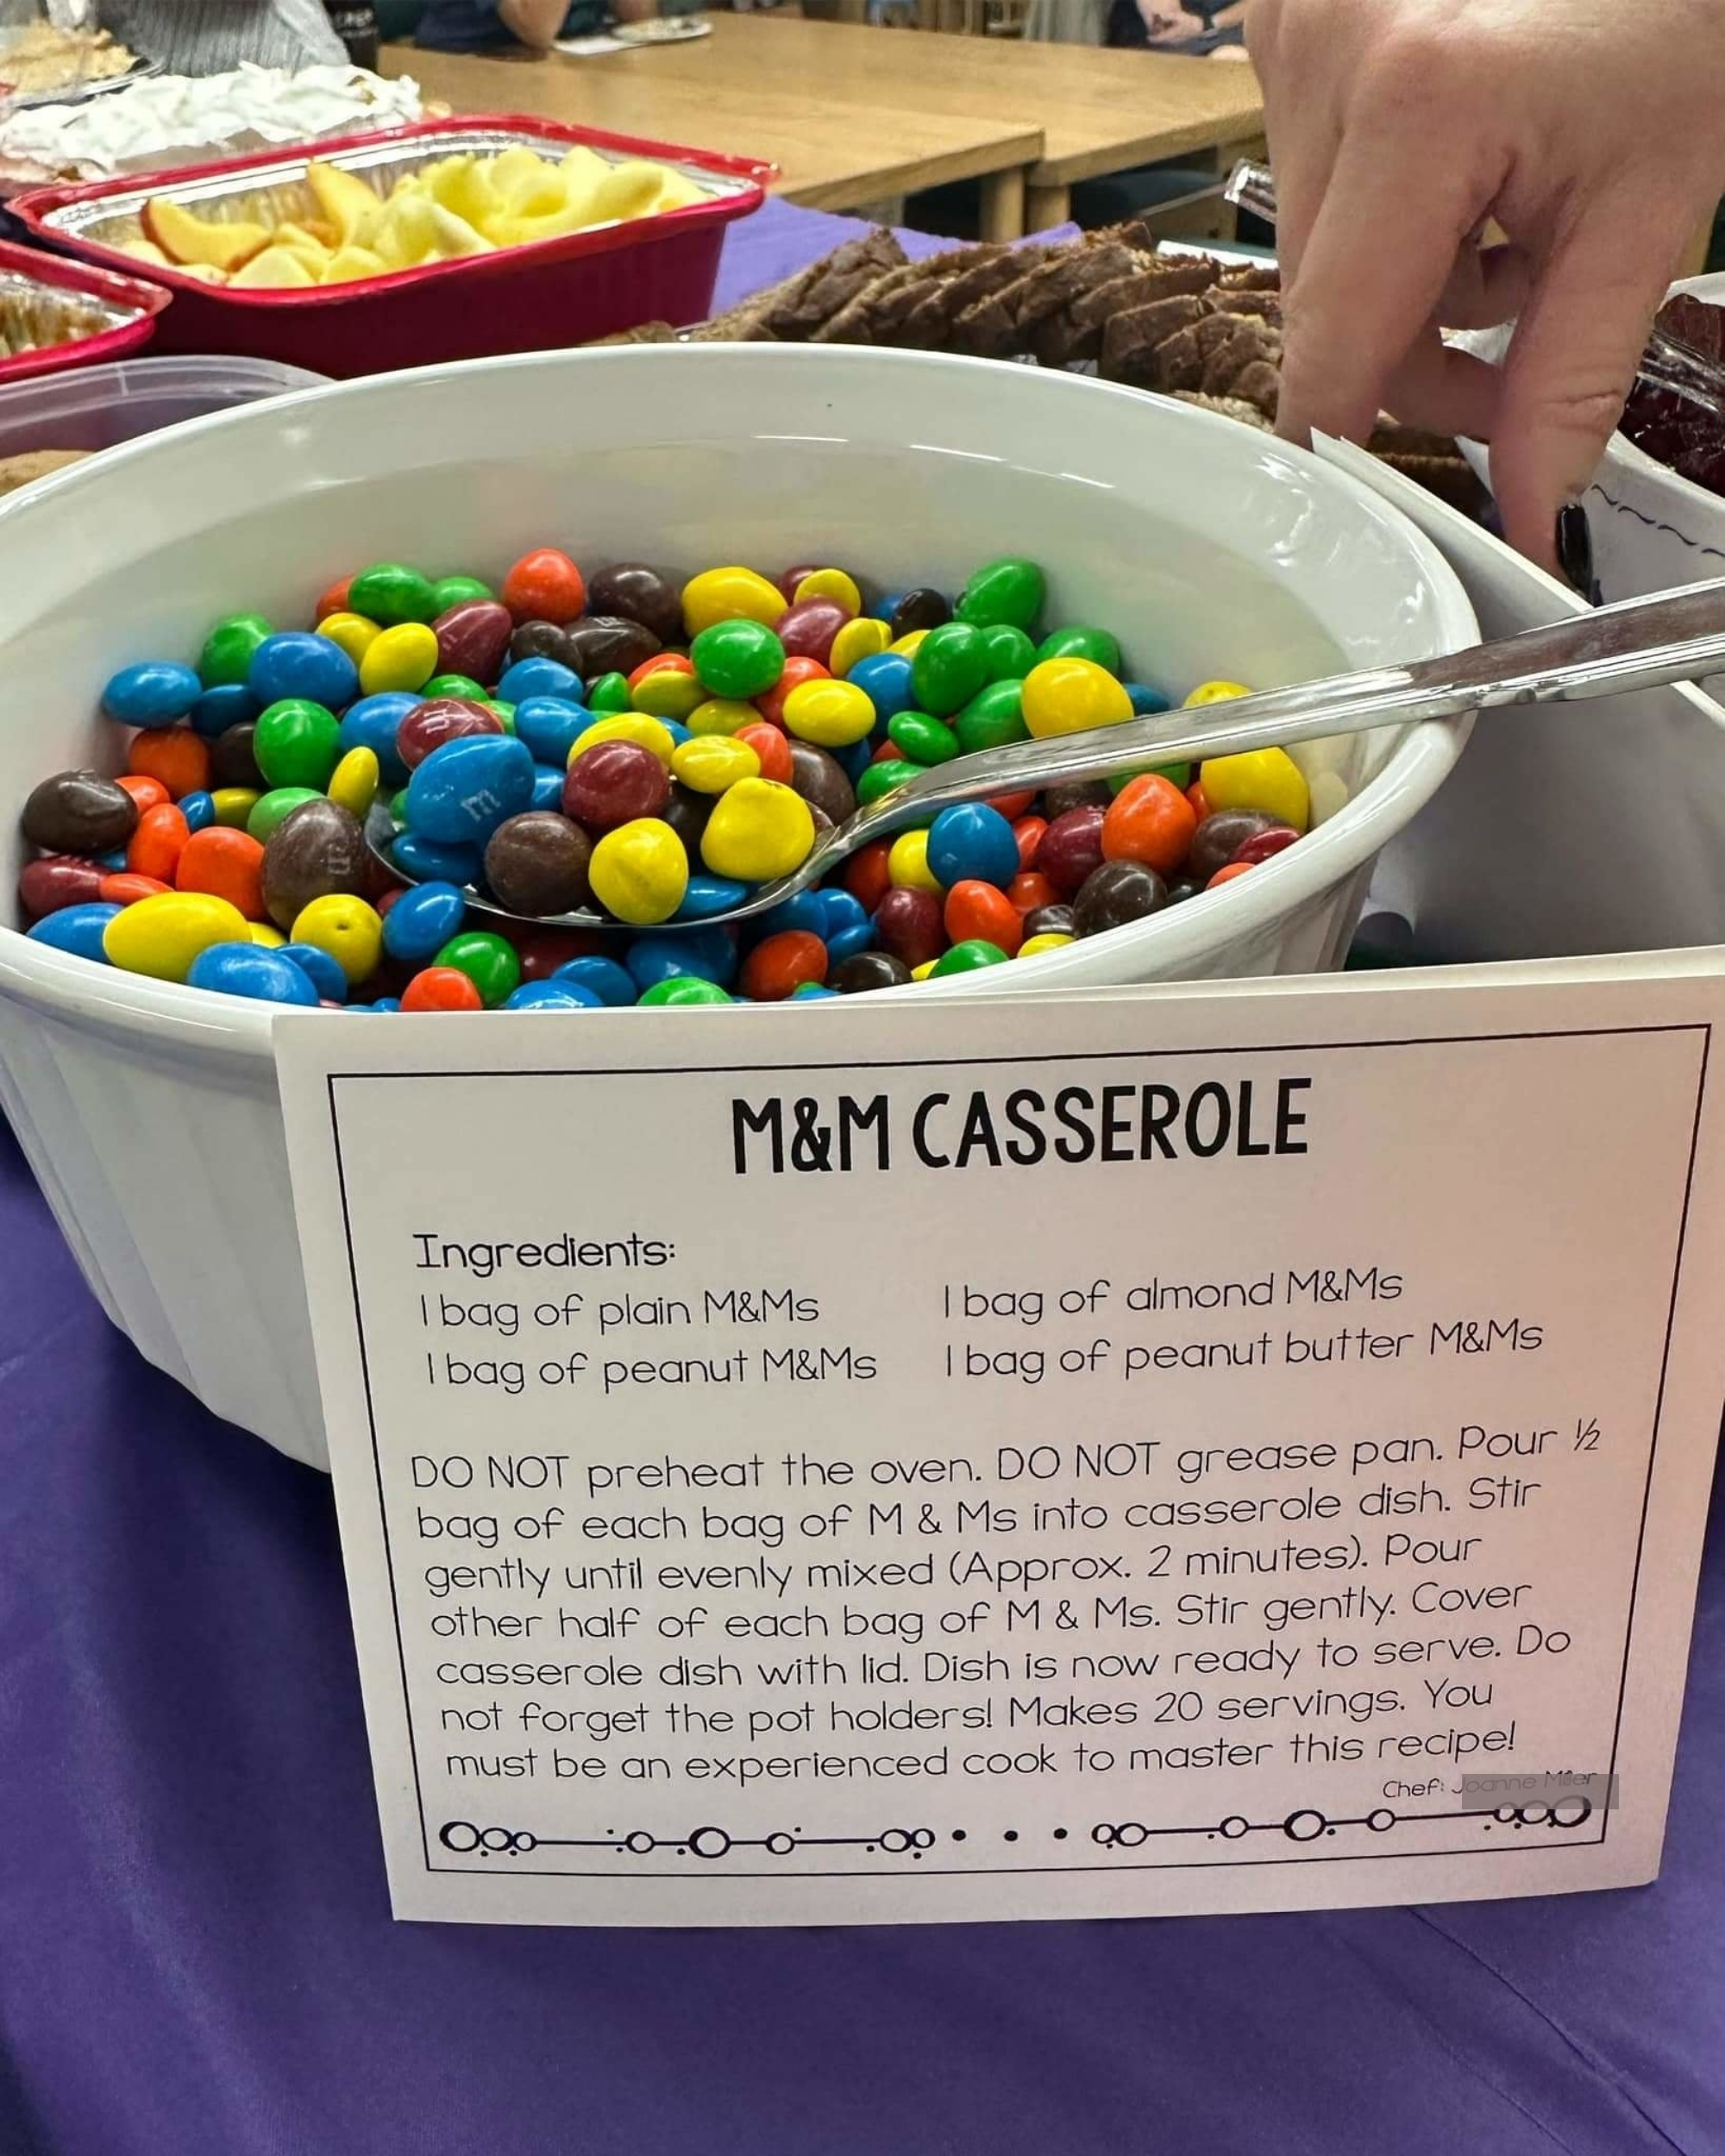 An M&amp;amp;M&#x27;s casserole, consisting of 1 bag of plain M&amp;amp;M&#x27;s, 1 bag of peanut M&amp;amp;M&#x27;s, 1 bag of almond M&amp;amp;M&#x27;s, and 1 bag of peanut butter M&amp;amp;M&#x27;s, in a bowl; recipe card says DO NOT preheat the oven or grease pan; stir gently, makes 20 servings